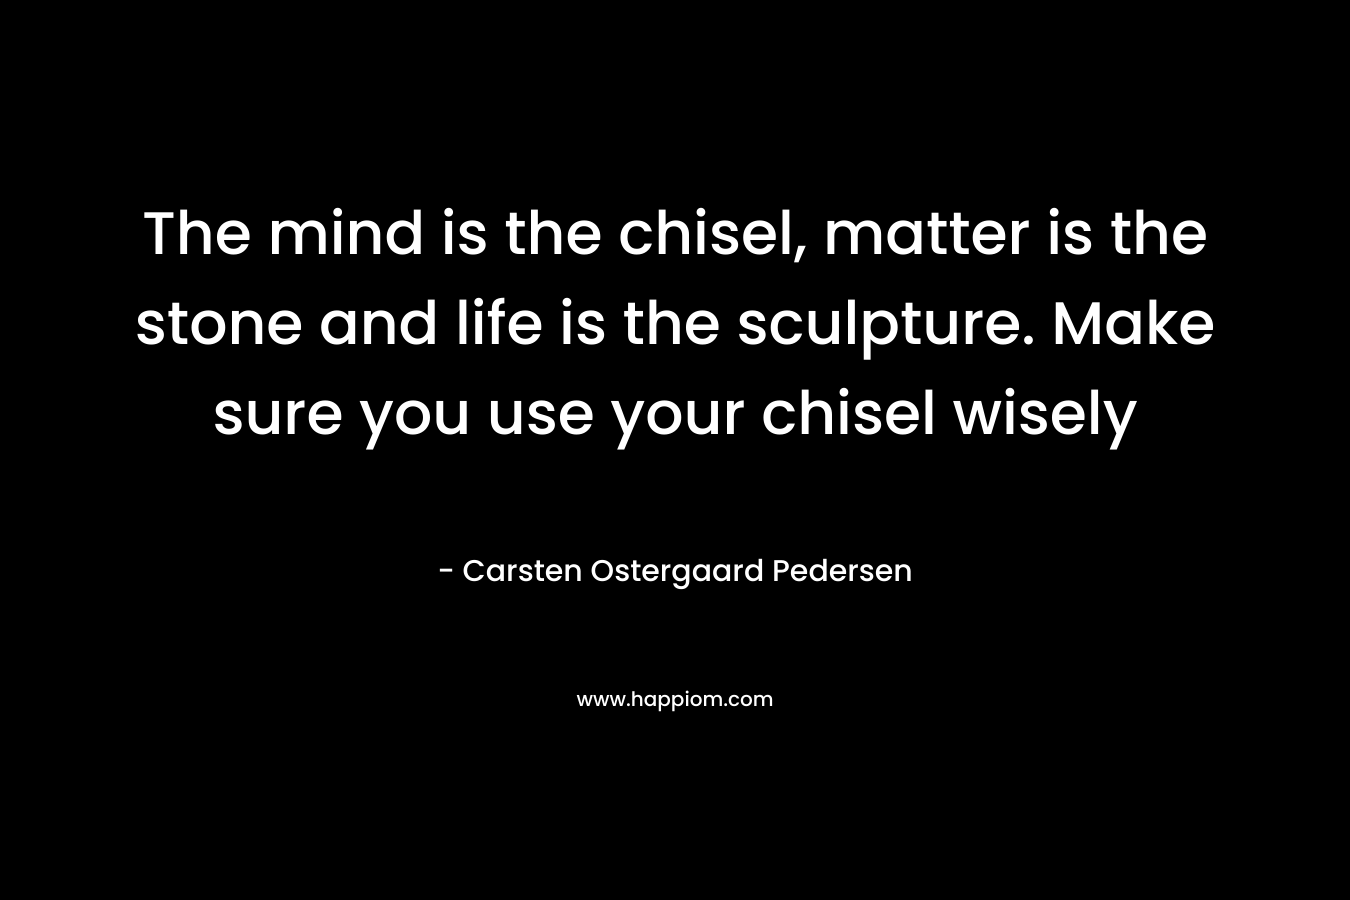 The mind is the chisel, matter is the stone and life is the sculpture. Make sure you use your chisel wisely – Carsten Ostergaard Pedersen